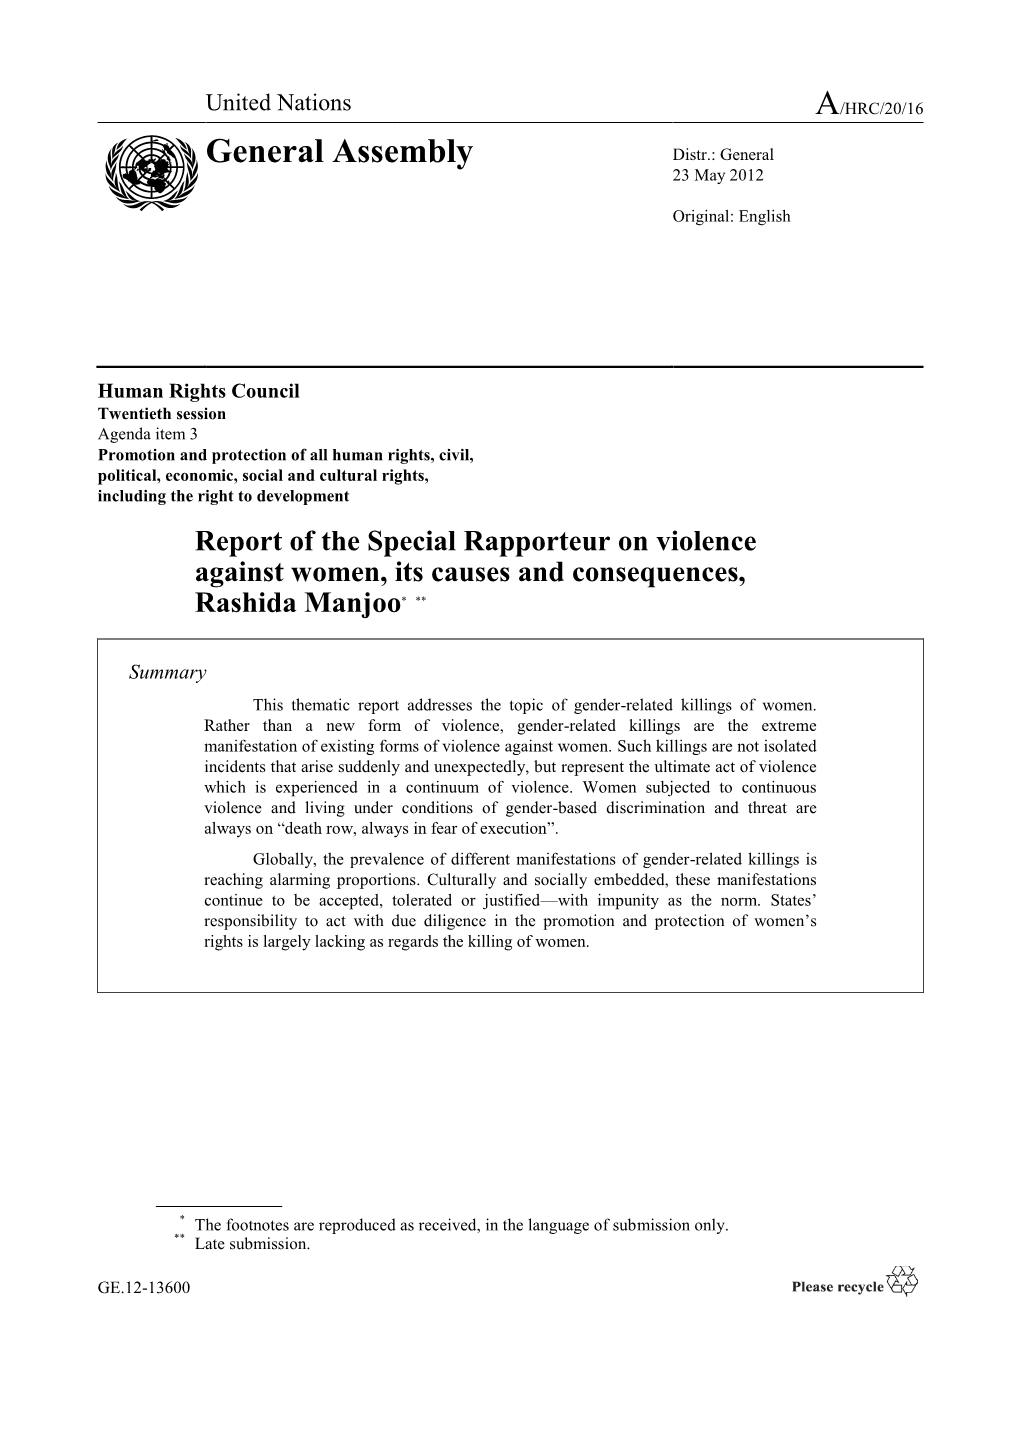 Report of the Special Rapporteur on Violence Against Women, Its Causes and Consequences, Rashida Manjoo* **